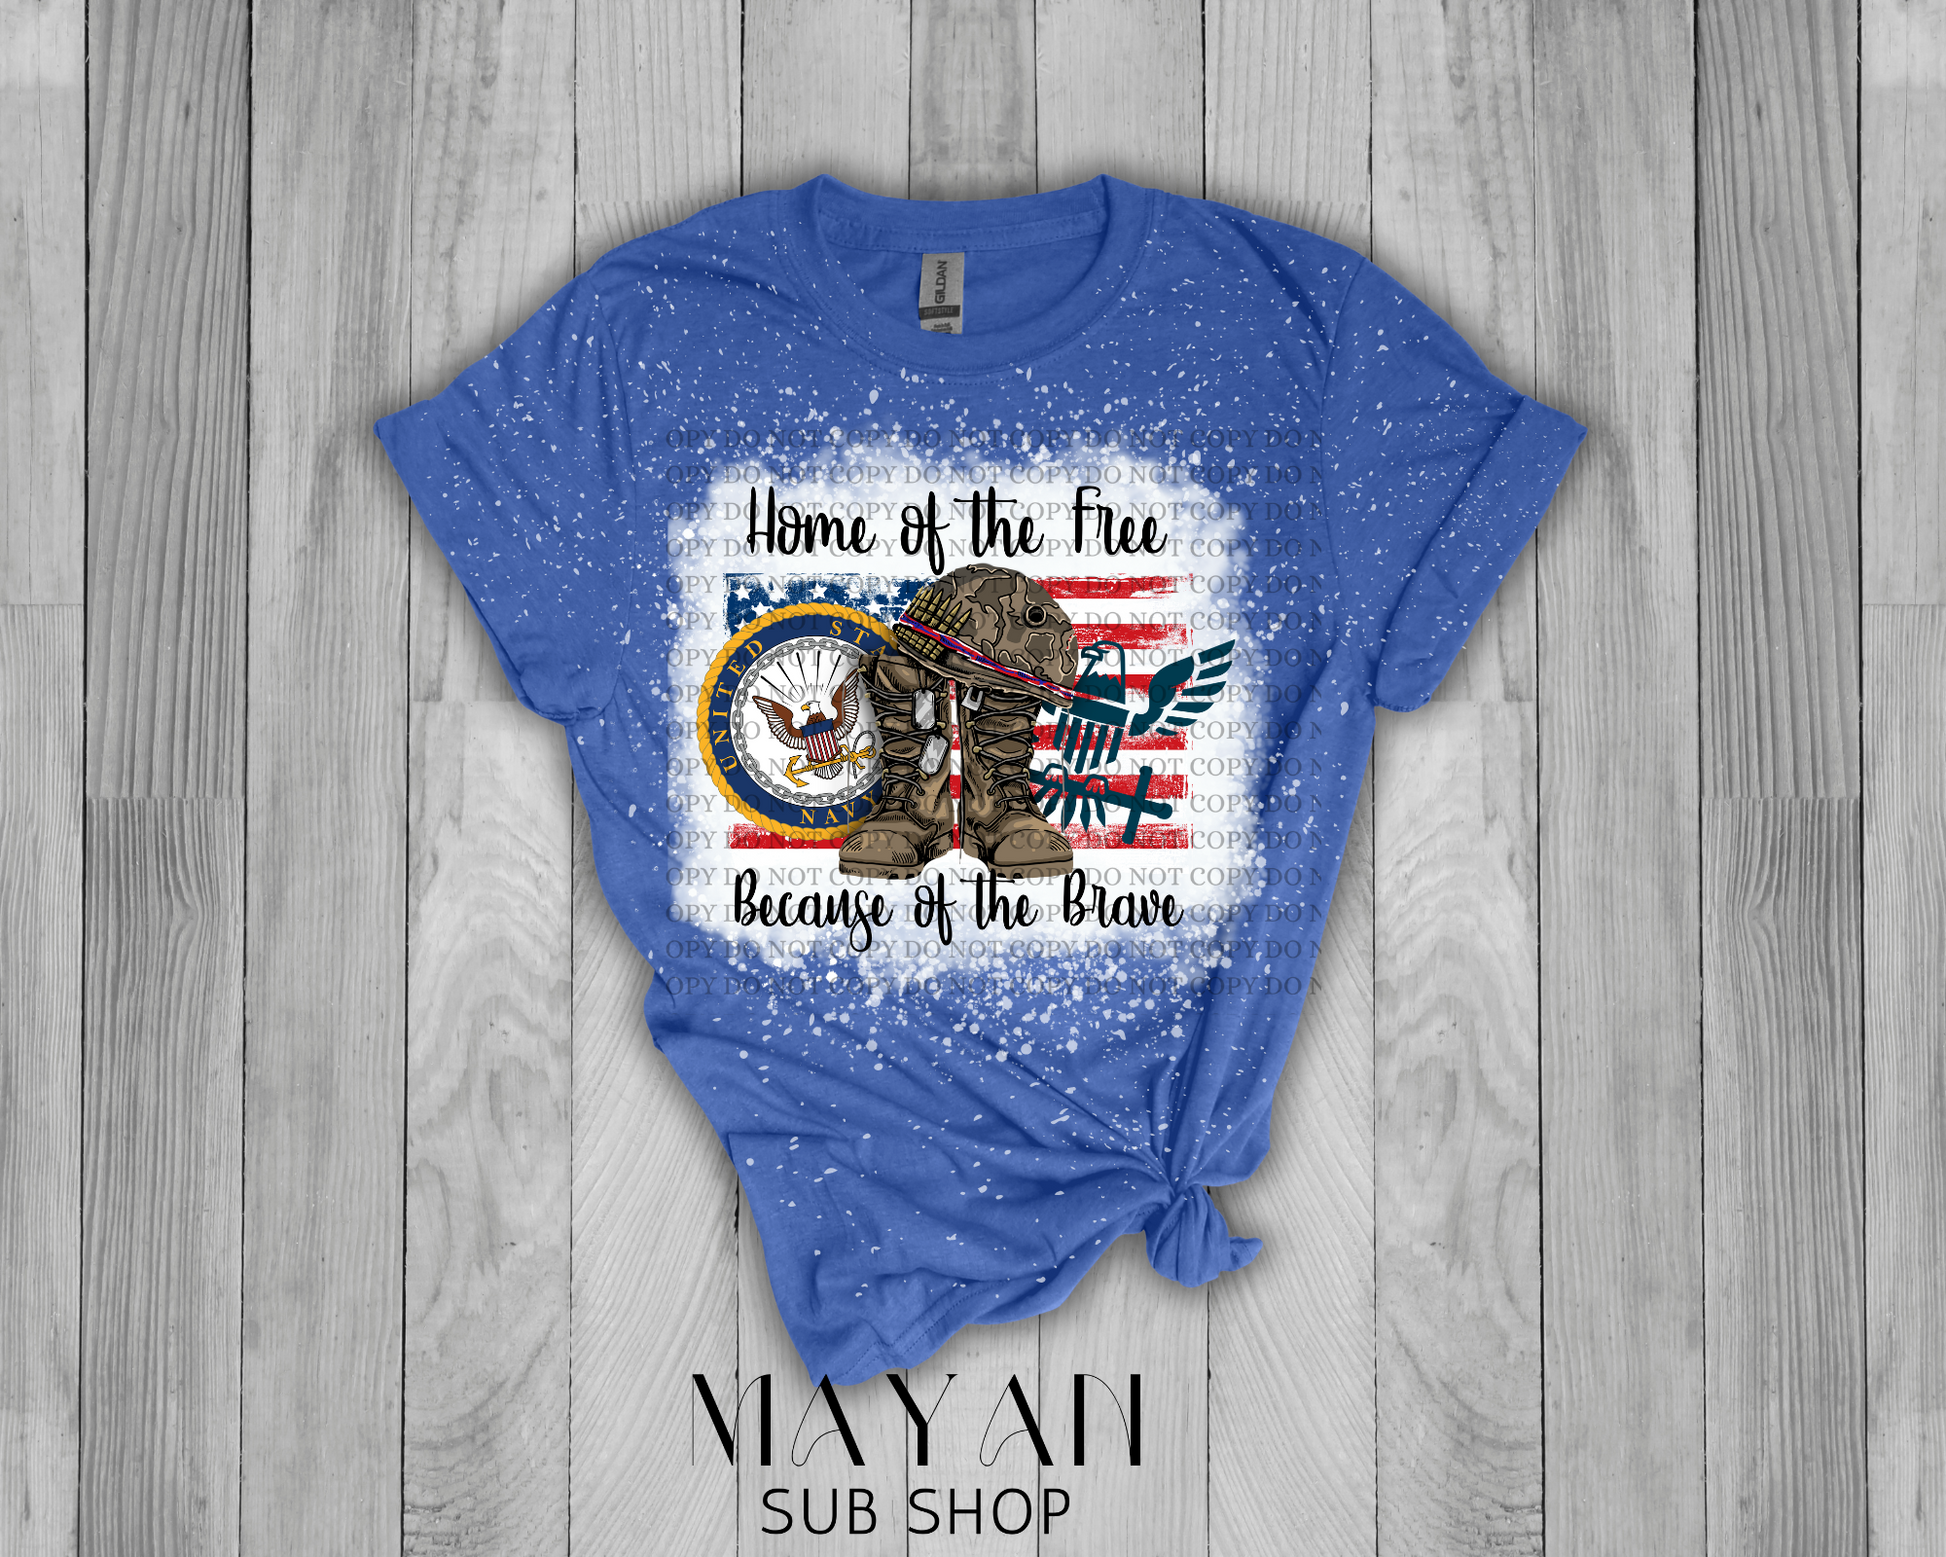 Home of the free navy in heather royal blue bleached shirt. - Mayan Sub Shop